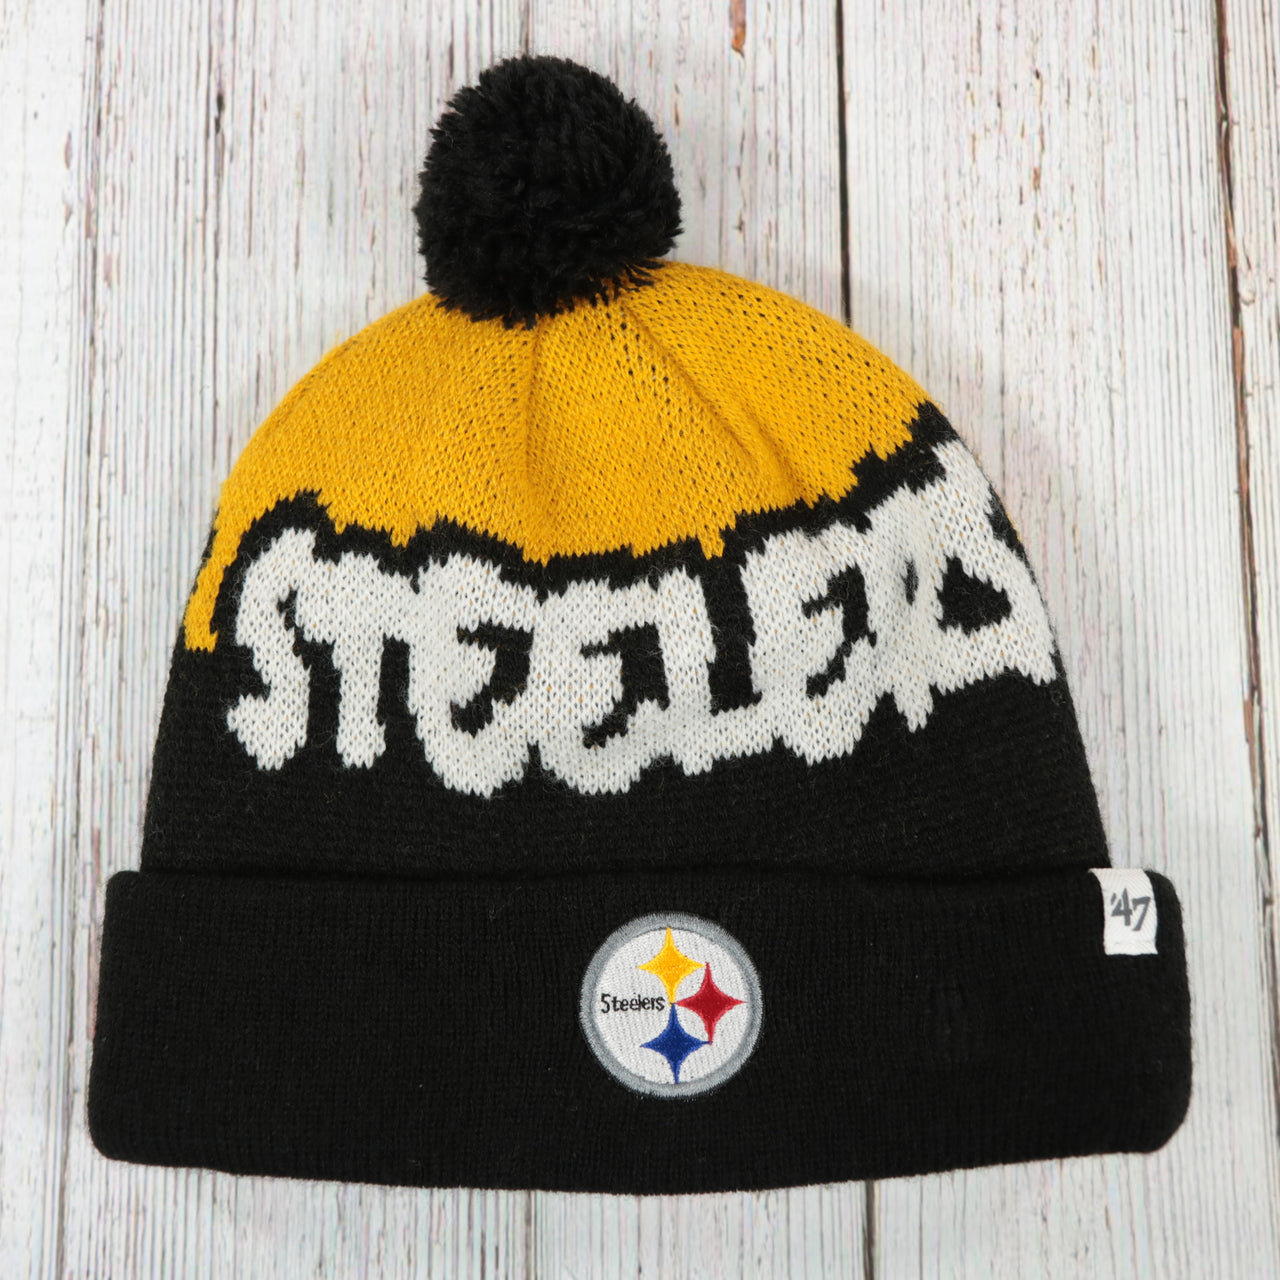 Pittsburgh Steelers Youth Sized "Underdog" Knit Pom Winter Beanie